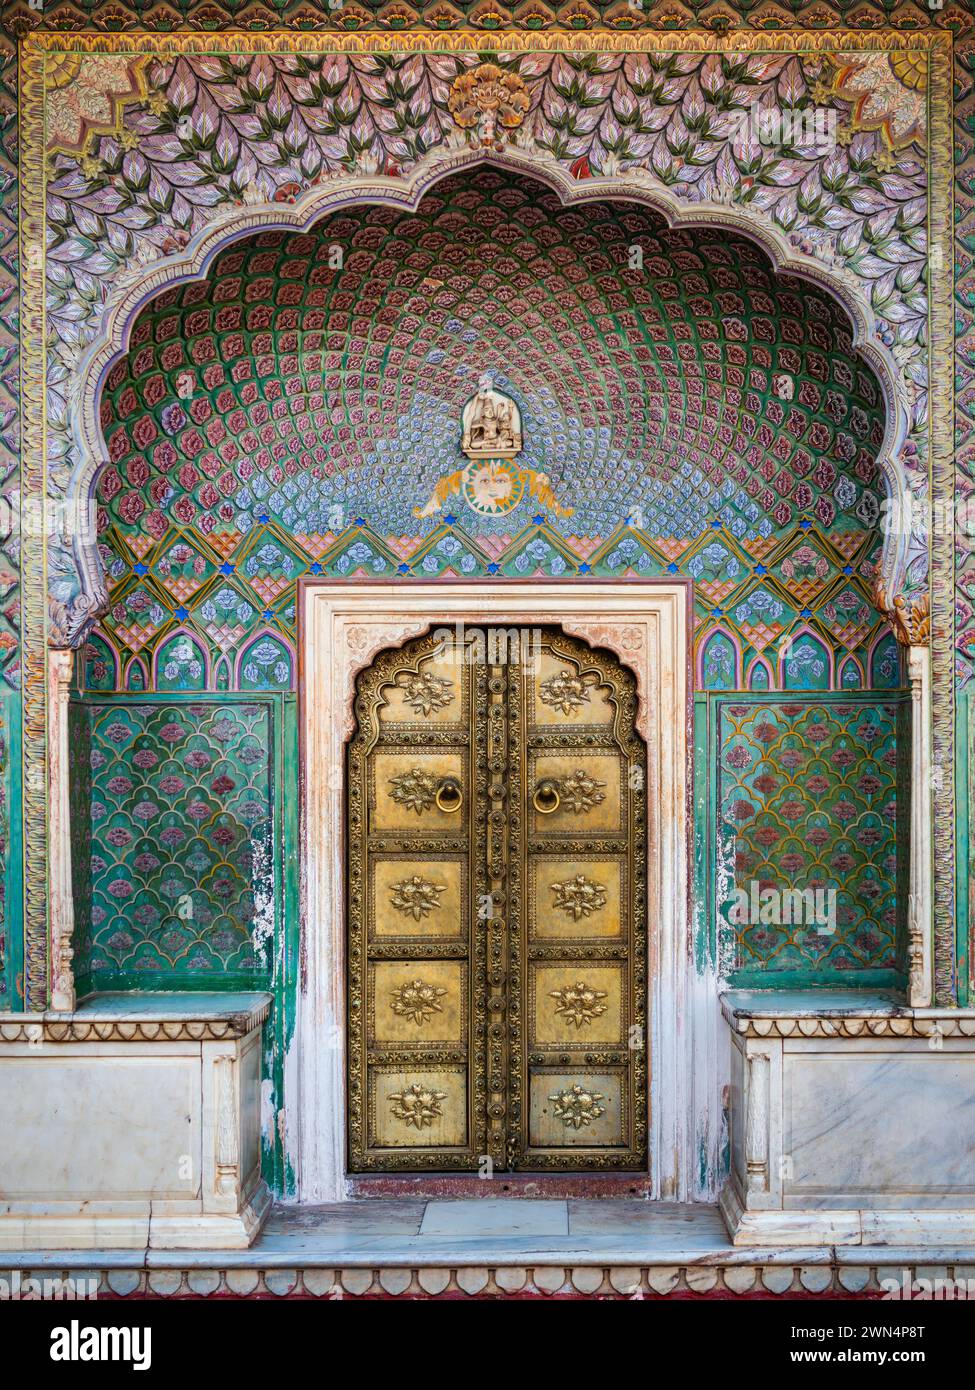 Das farbenfrohe Rosentor am Jaipur City Palace in Rajasthan, Indien. Stockfoto